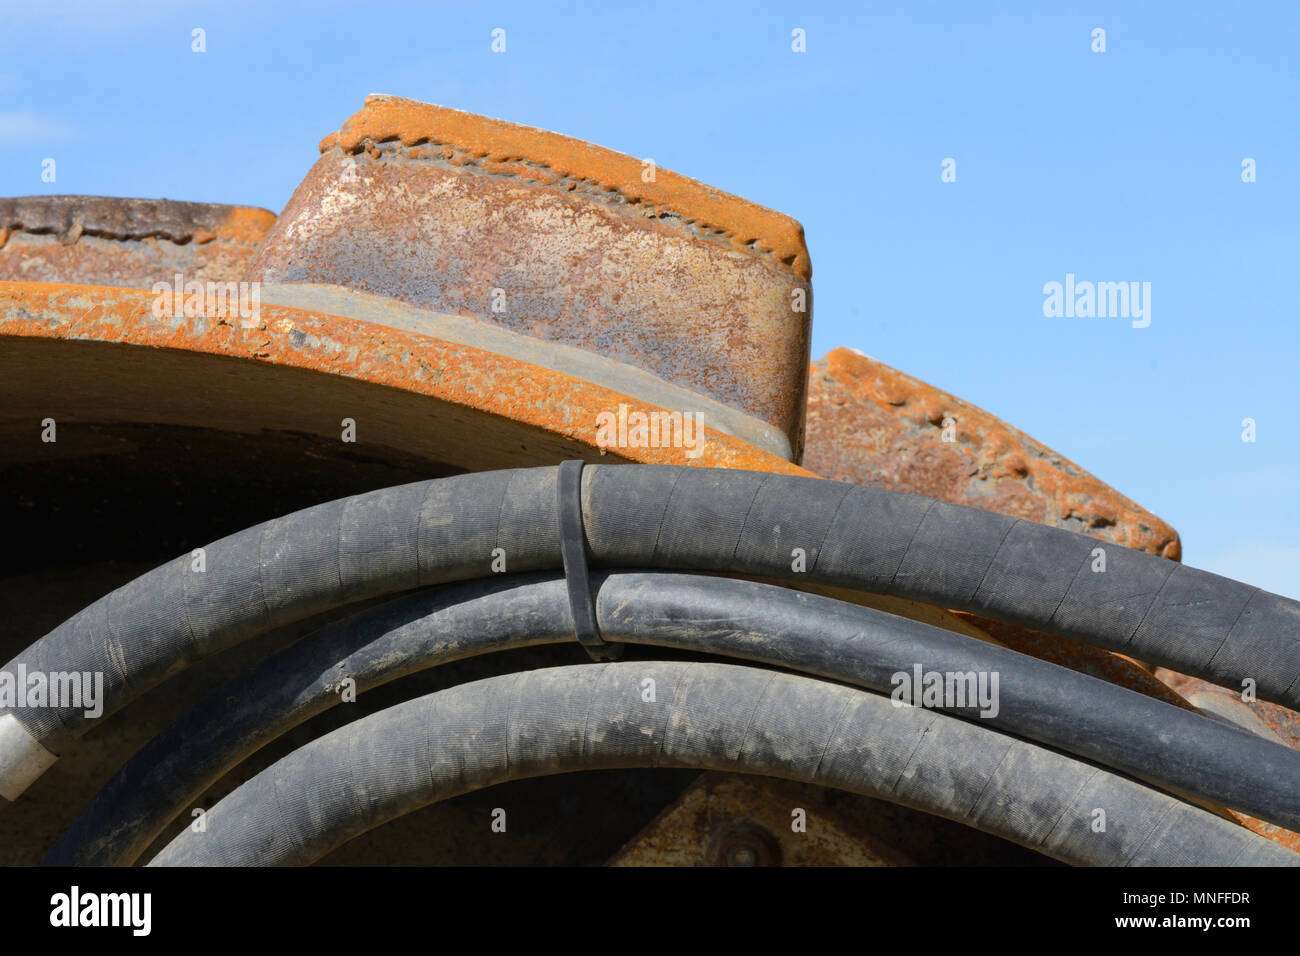 Close up of sheep foot roller compaction road construction and repair machinery against blue sky Stock Photo